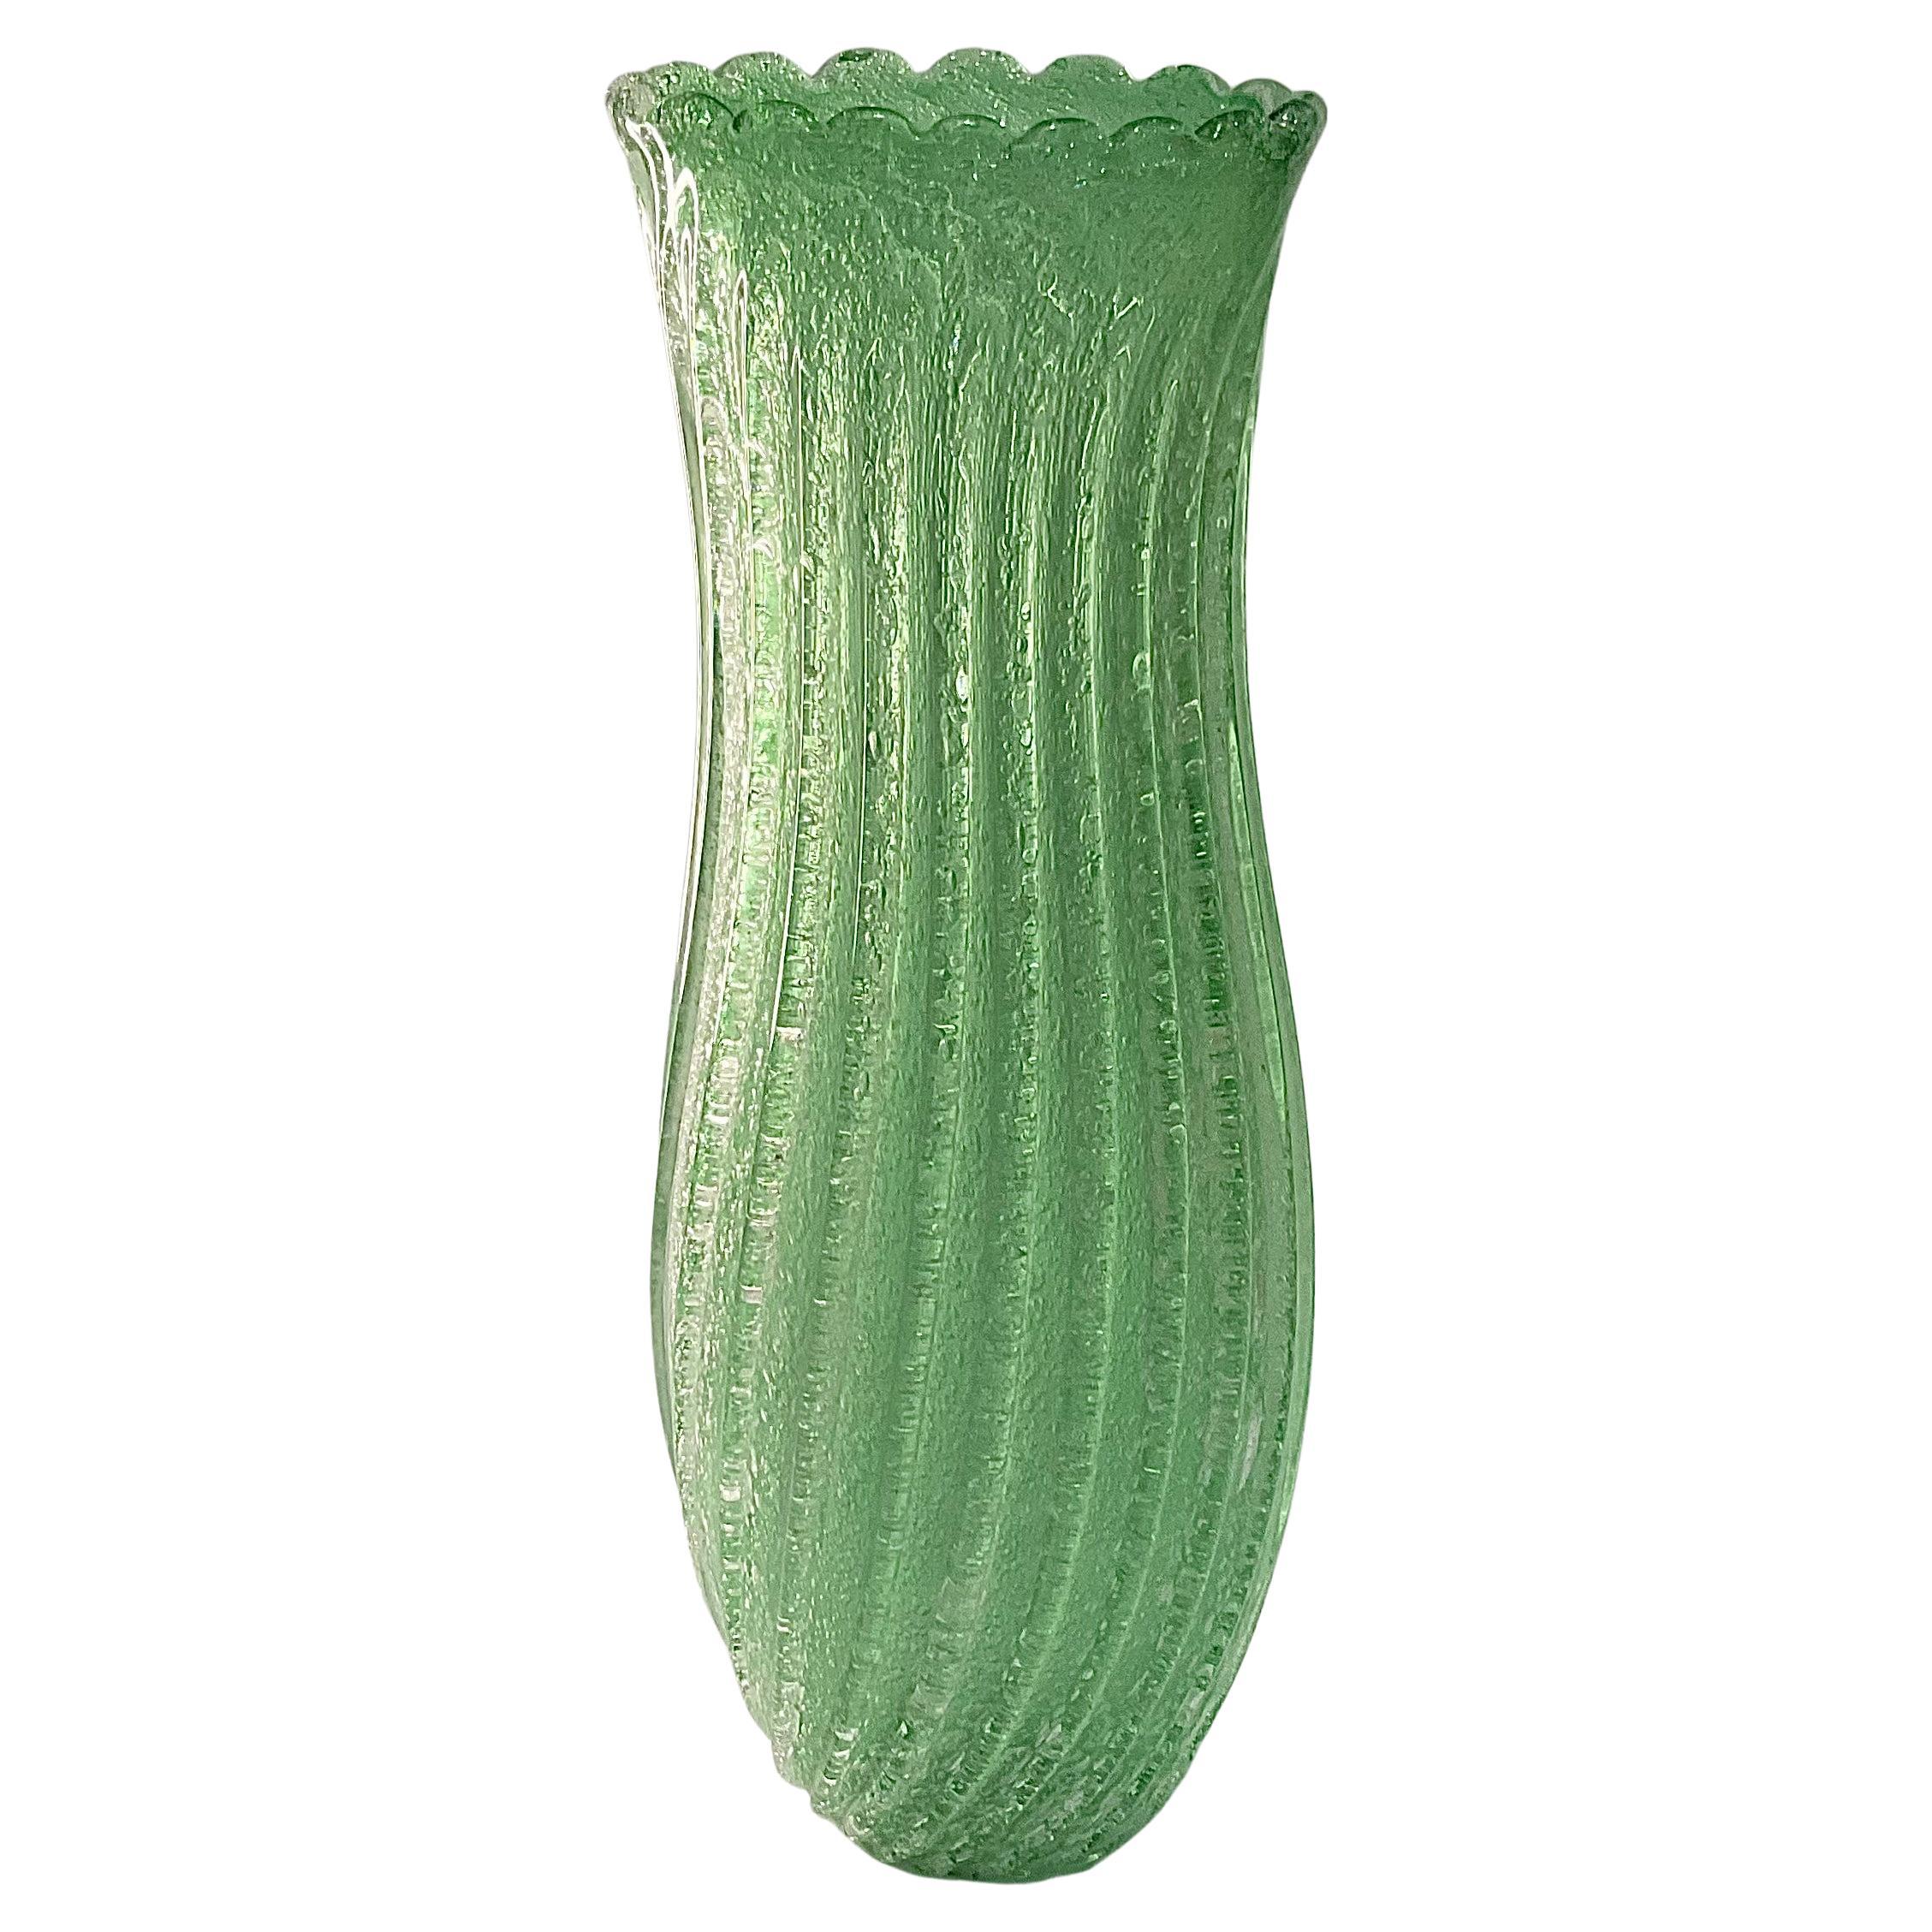 Large Murano Art Glass Vase in Green Pulegoso Glass with Ribbed Design Scalloped